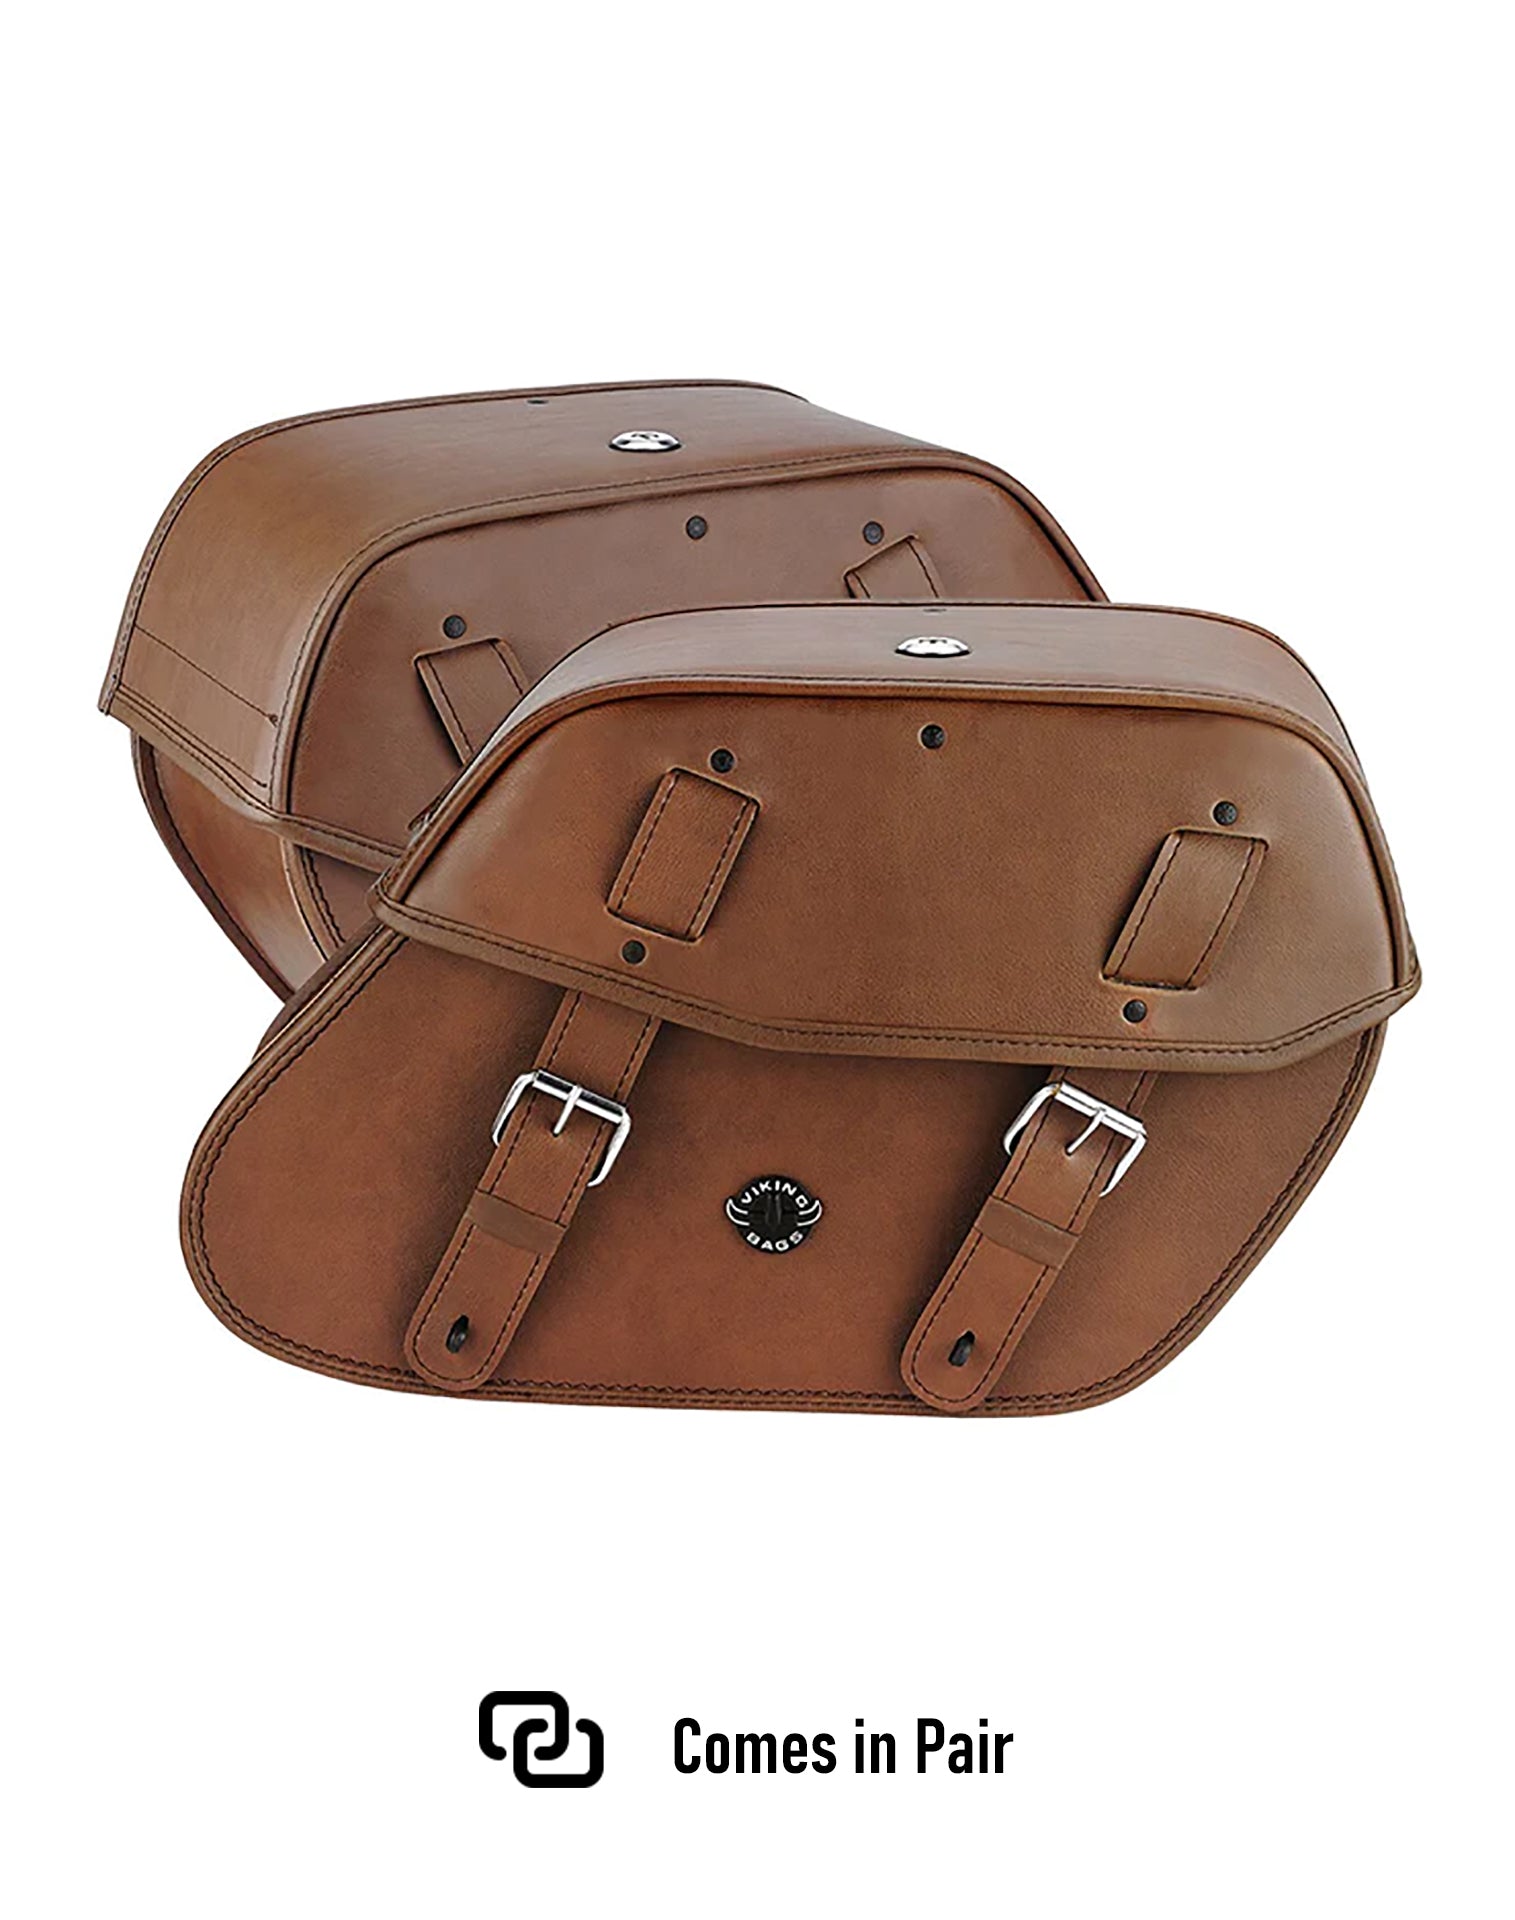 Viking Odin Brown Large Victory Gunner Leather Motorcycle Saddlebags Weather Resistant Bags Comes in Pair